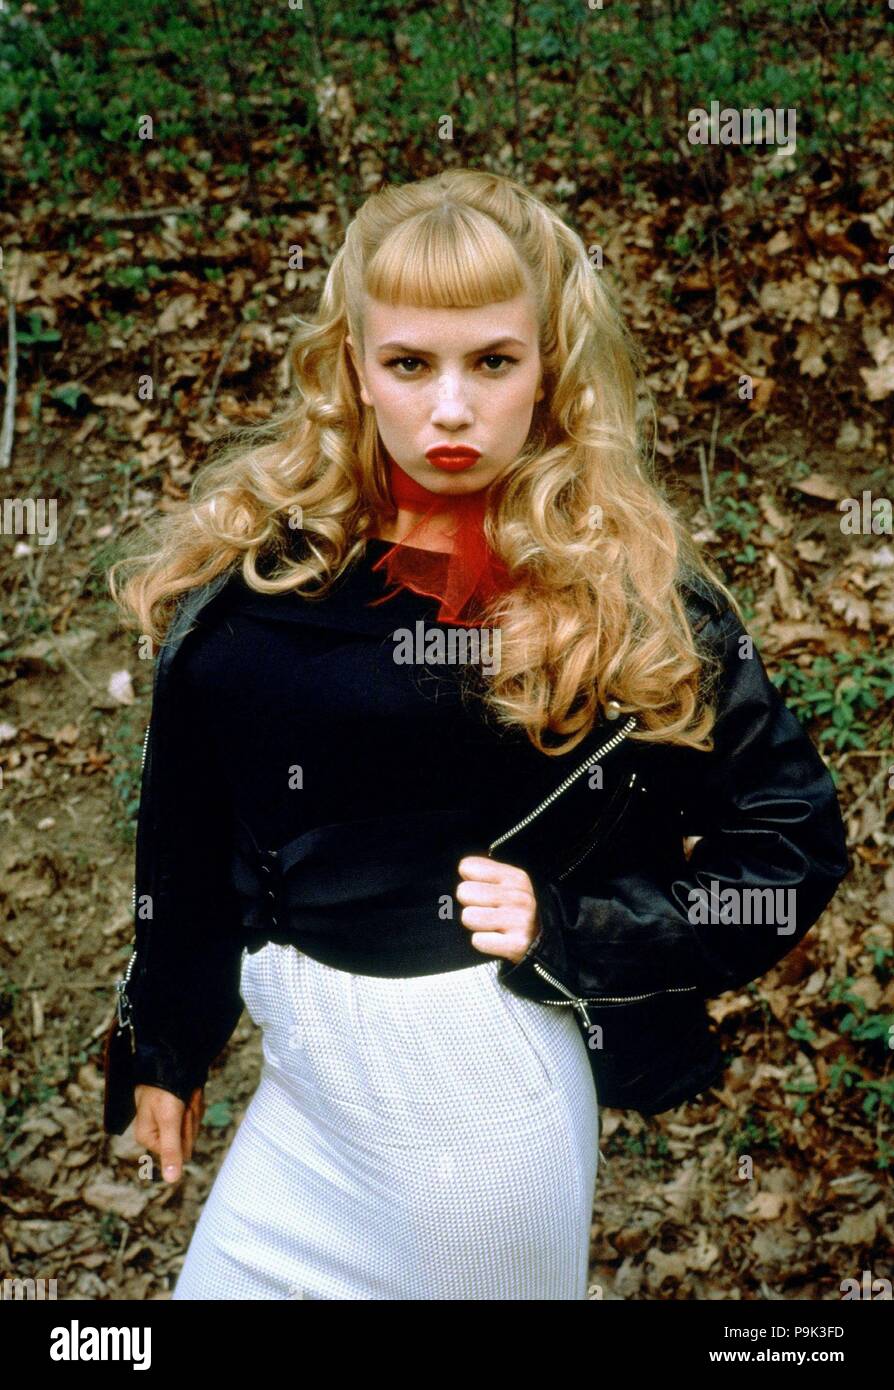 Original Film Title: CRY-BABY.  English Title: CRY-BABY.  Film Director: JOHN WATERS.  Year: 1990.  Stars: TRACI LORDS. Credit: UNIVERSAL PICTURES / Album Stock Photo